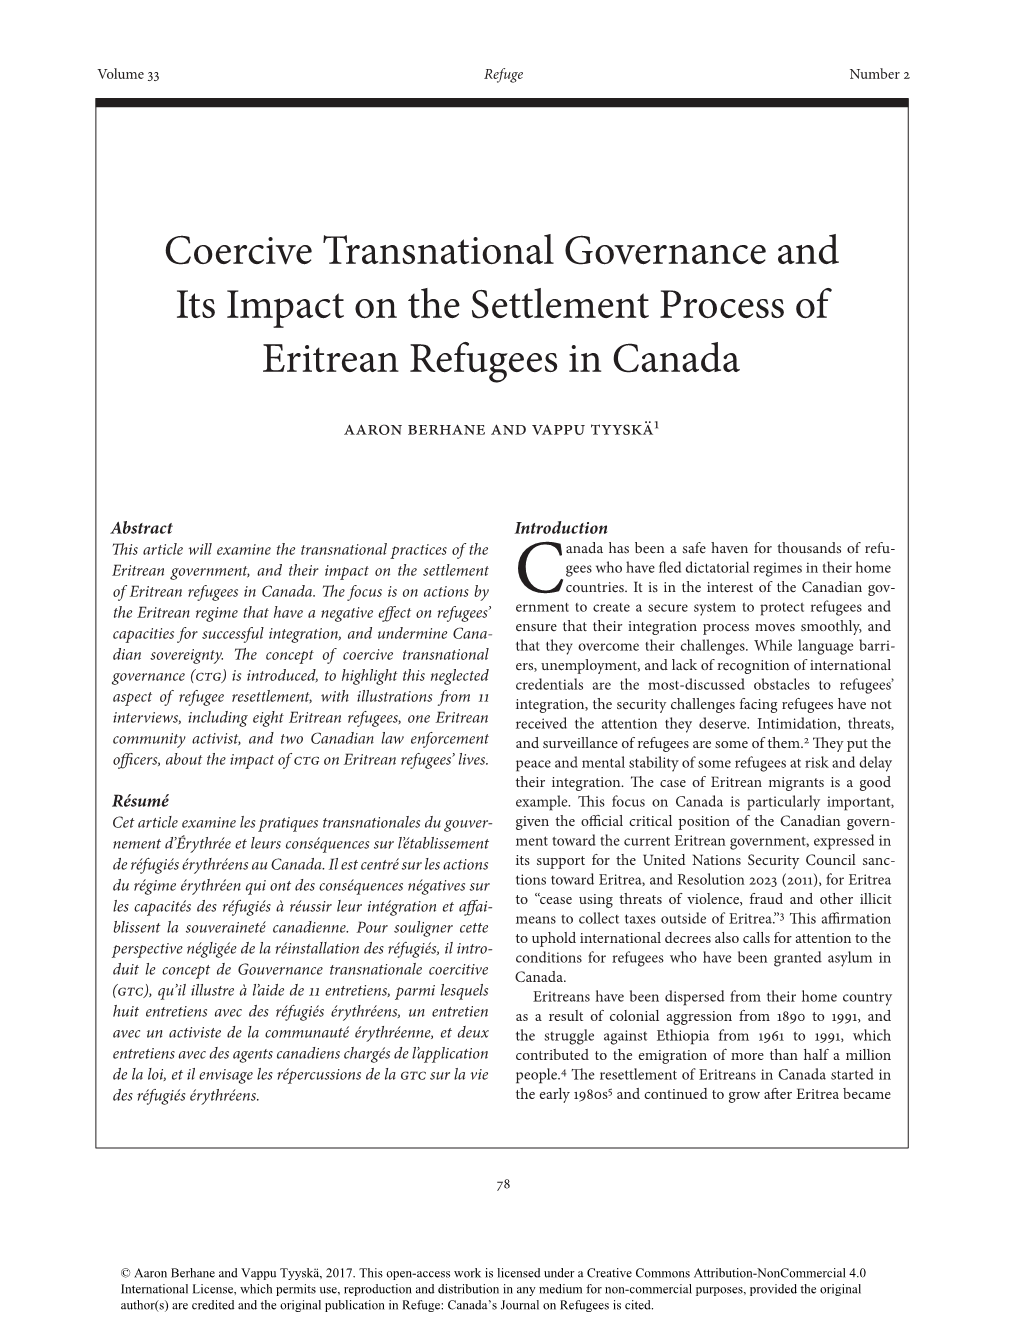 Coercive Transnational Governance and Its Impact on the Settlement Process of Eritrean Refugees in Canada